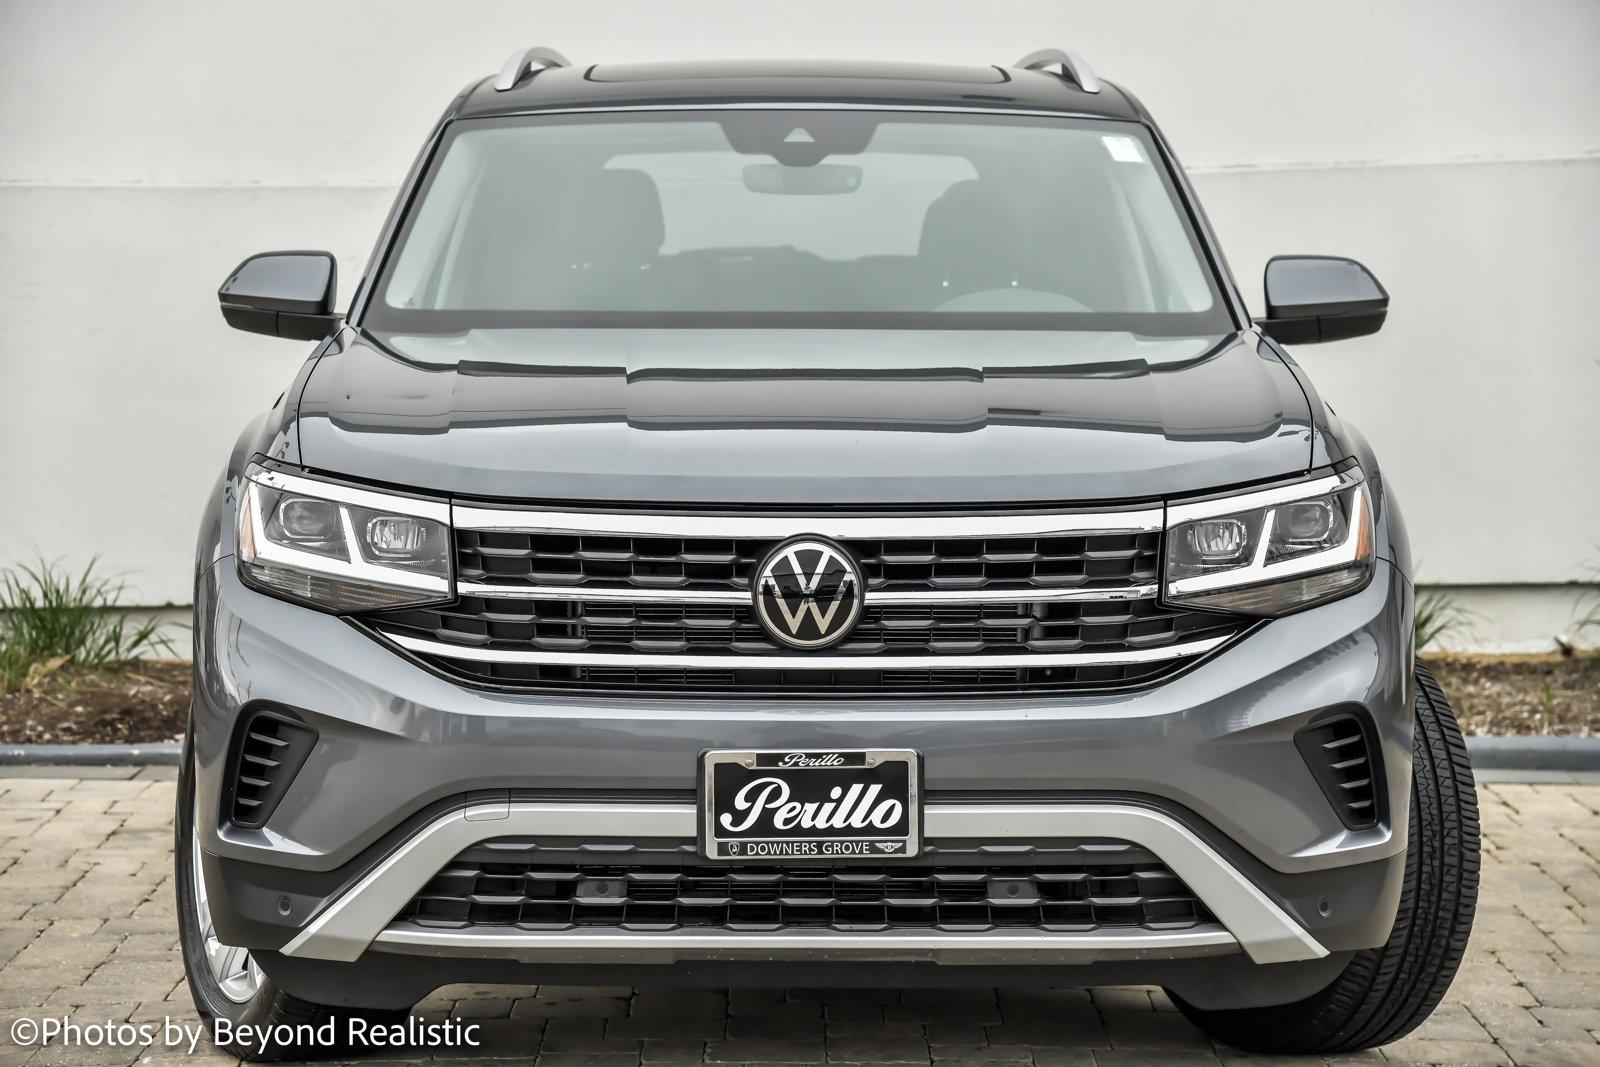 Used 2021 Volkswagen Atlas 3.6L V6 SEL, 3rd Row | Downers Grove, IL